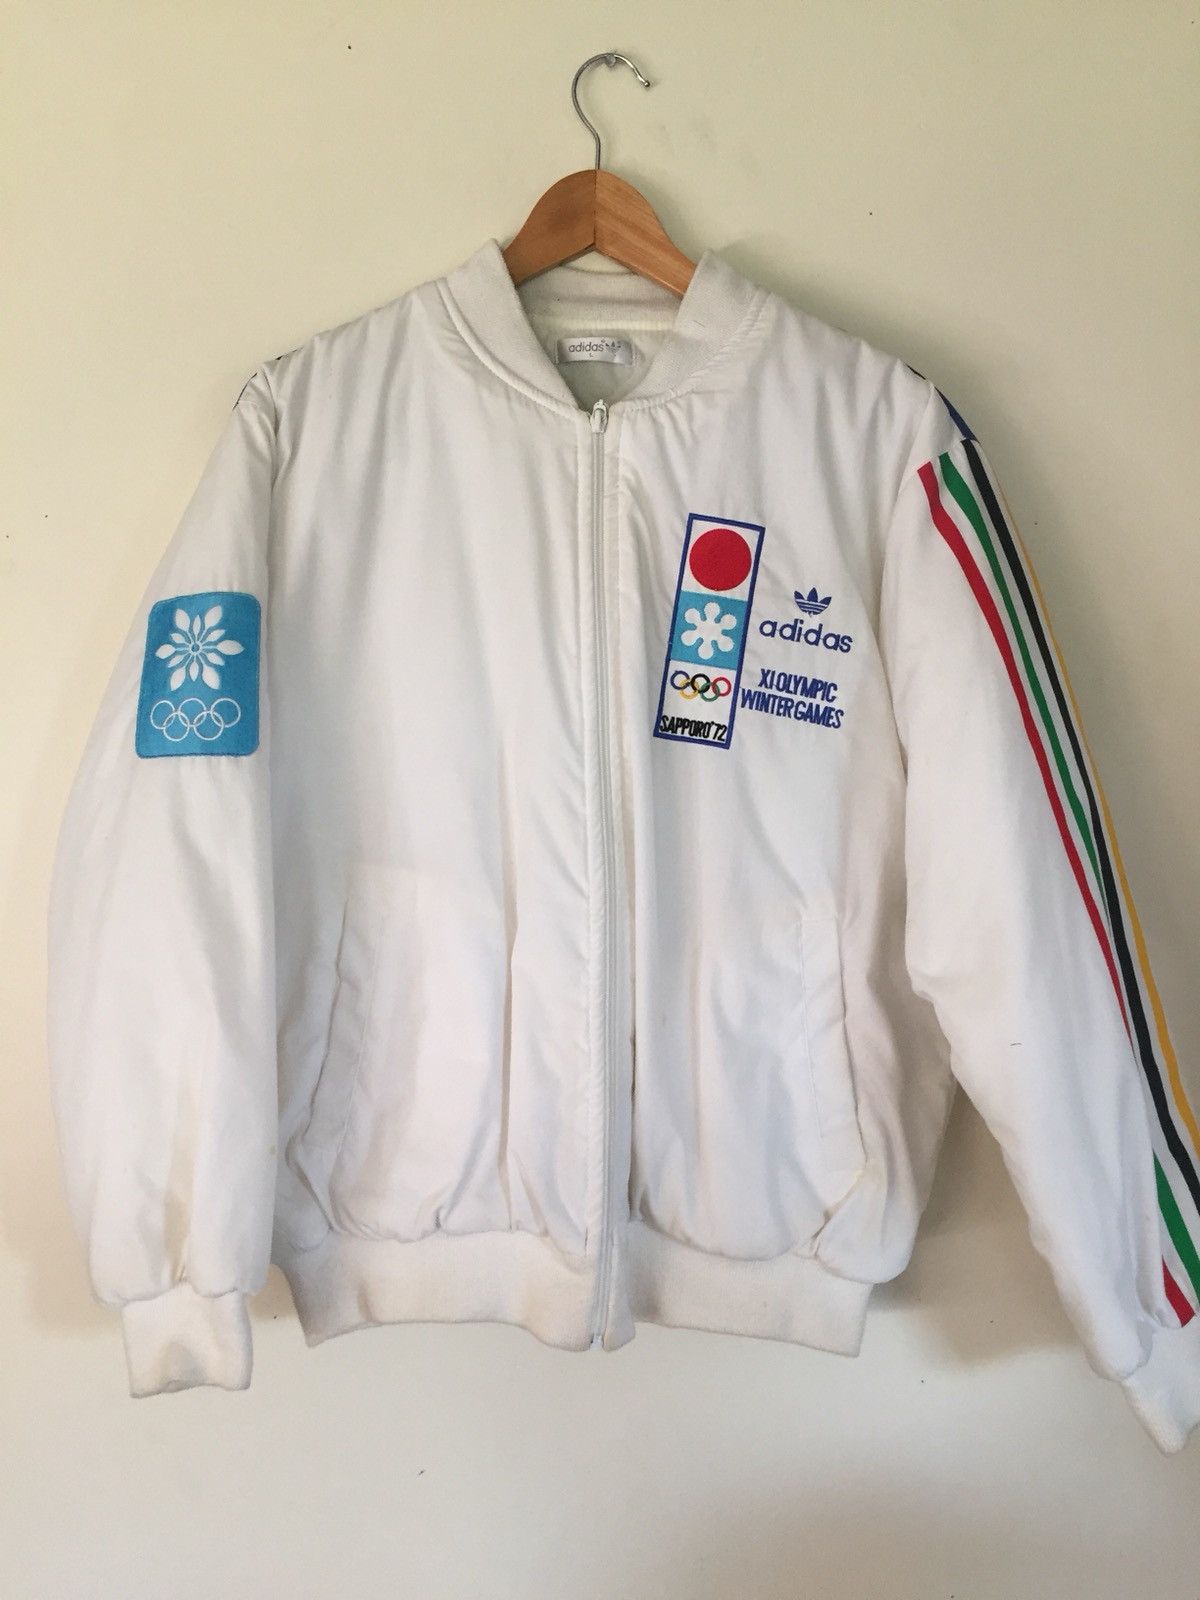 Adidas Vintage Adidas 1972 Olympic Jacket Size US M / EU 48-50 / 2 - 2 Preview